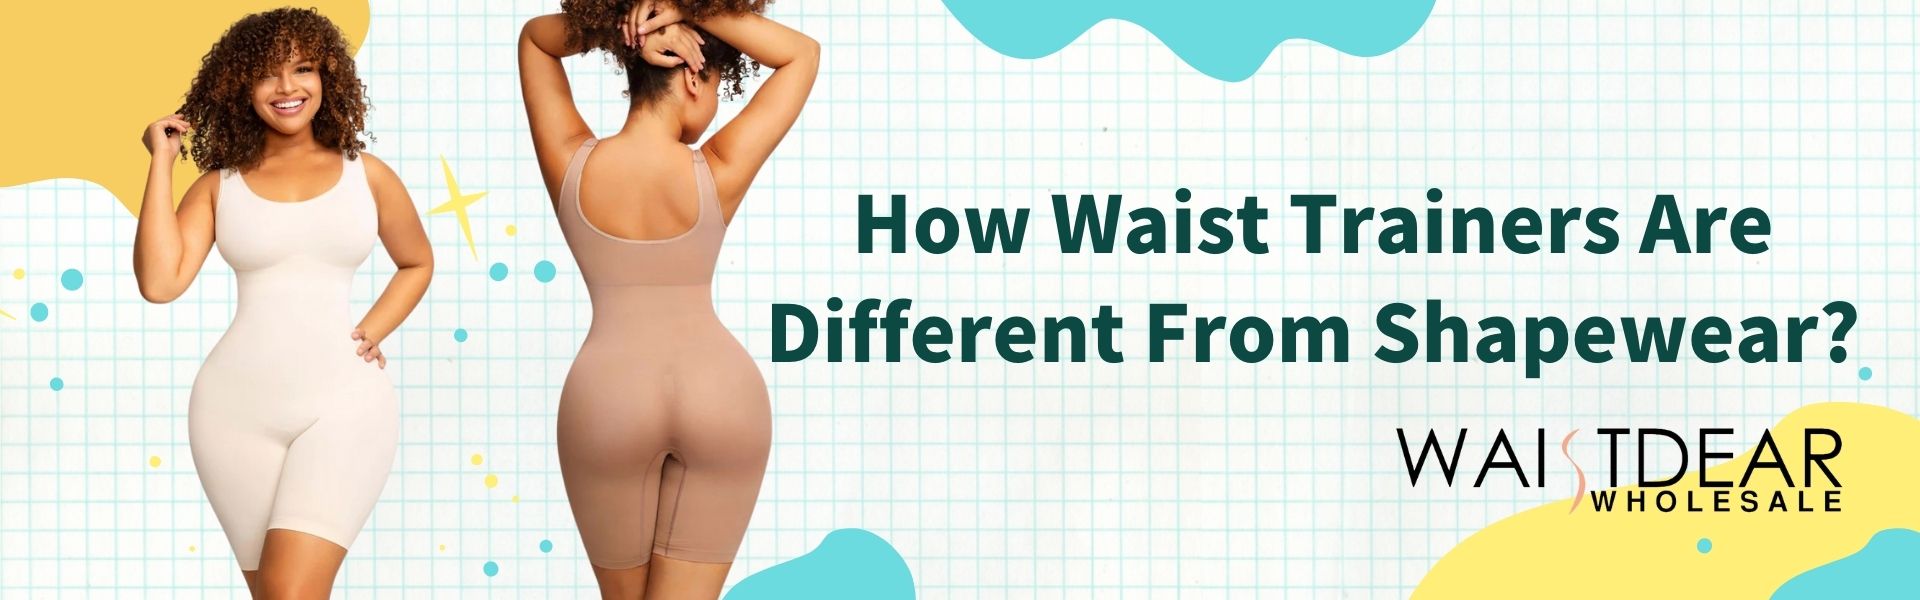 How Waist Trainers Are Different From Shapewear?